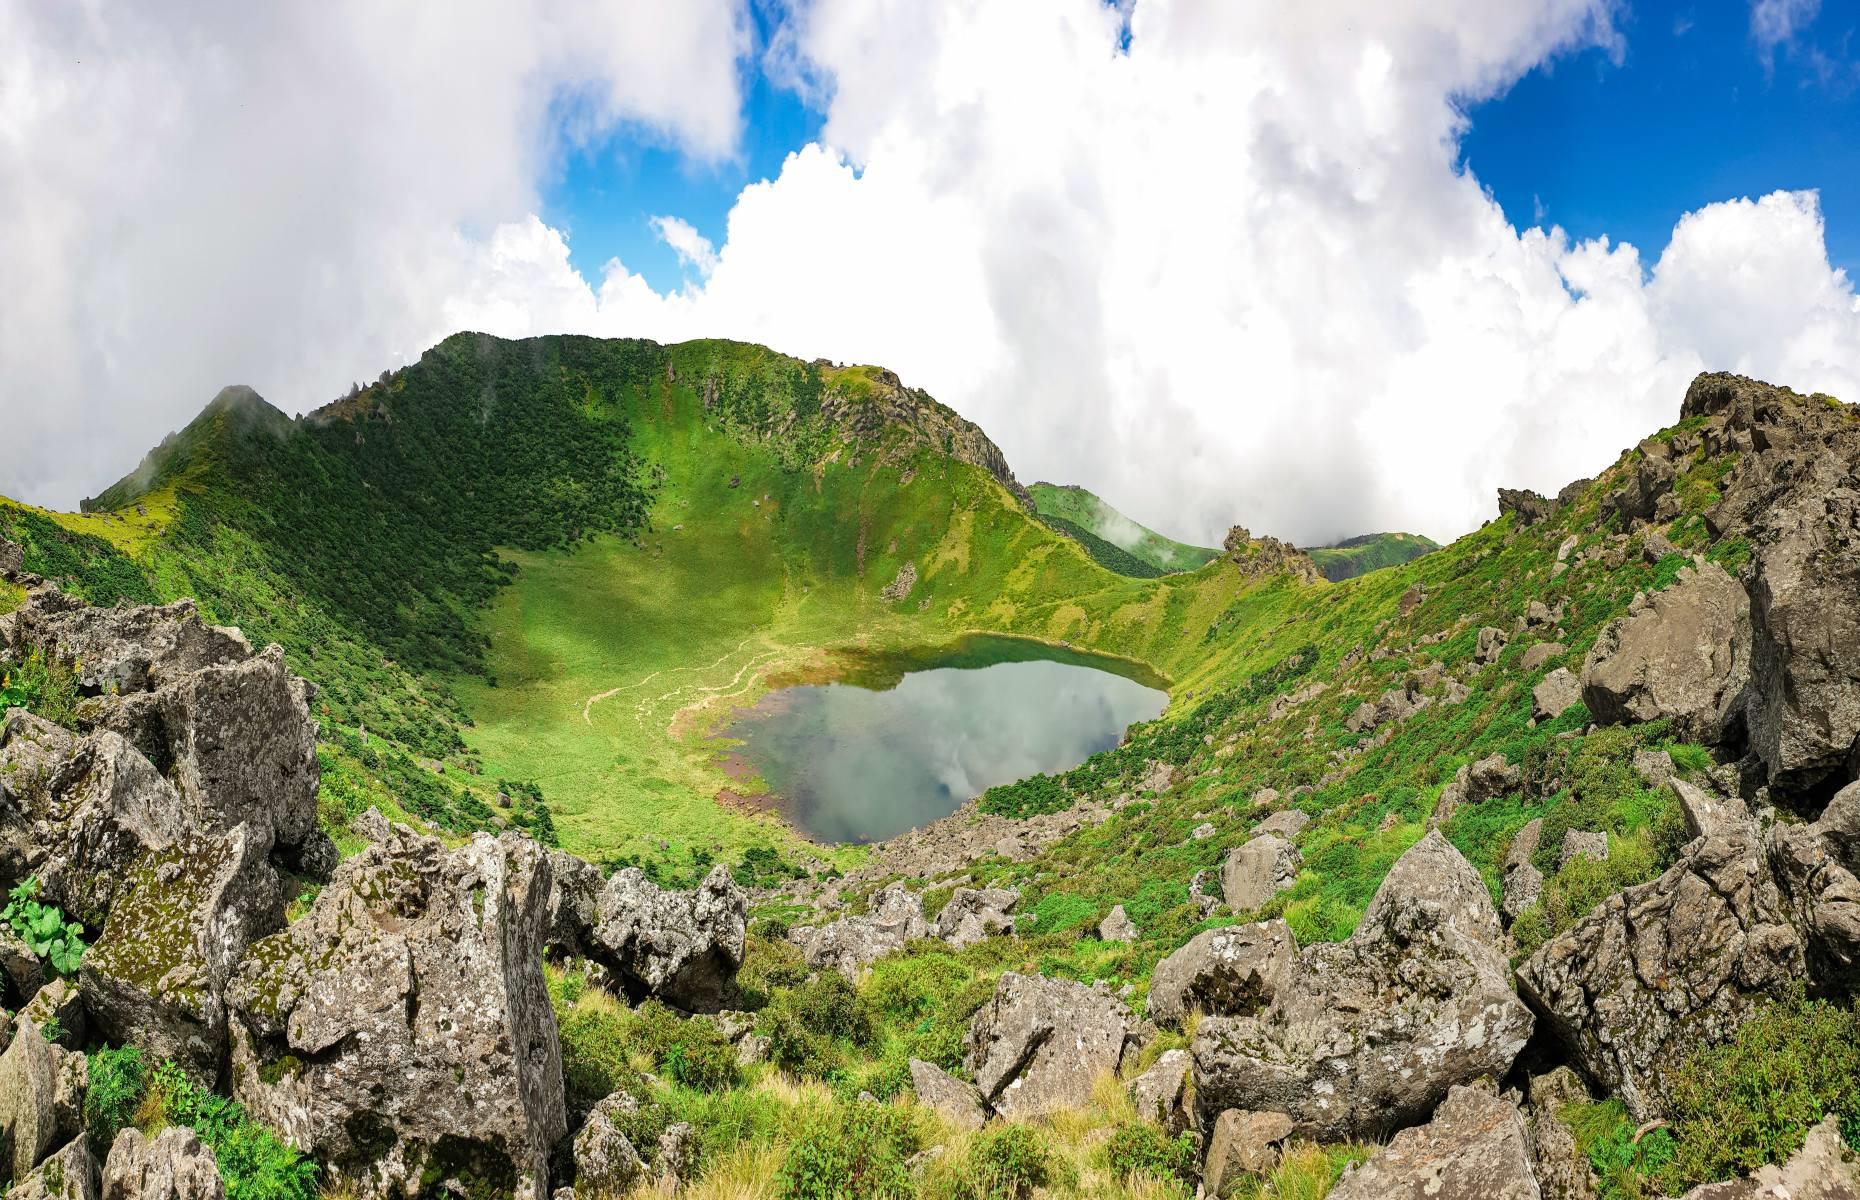 <p>Stunning summits await at Hallasan Mountain, which sits at the center of Jeju Island. Also called Yeongjusan (meaning ‘mountain high enough to pull the galaxy’), this national geopark proudly takes the title of South Korea’s tallest mountain at almost 6,400 feet (1,950m) above sea level. It's home to 1,800 types of plant and 4,000 species of animal, and is topped with a famous crater lake. Immerse yourself in the mountain’s enchanting environment on the Seongpanak (6 miles/9.6km) or Gwaneumsa (5.4 miles/8.7km) trails. The trails are well-maintained, but, as with all mountains, research your route thoroughly before attempting.</p>